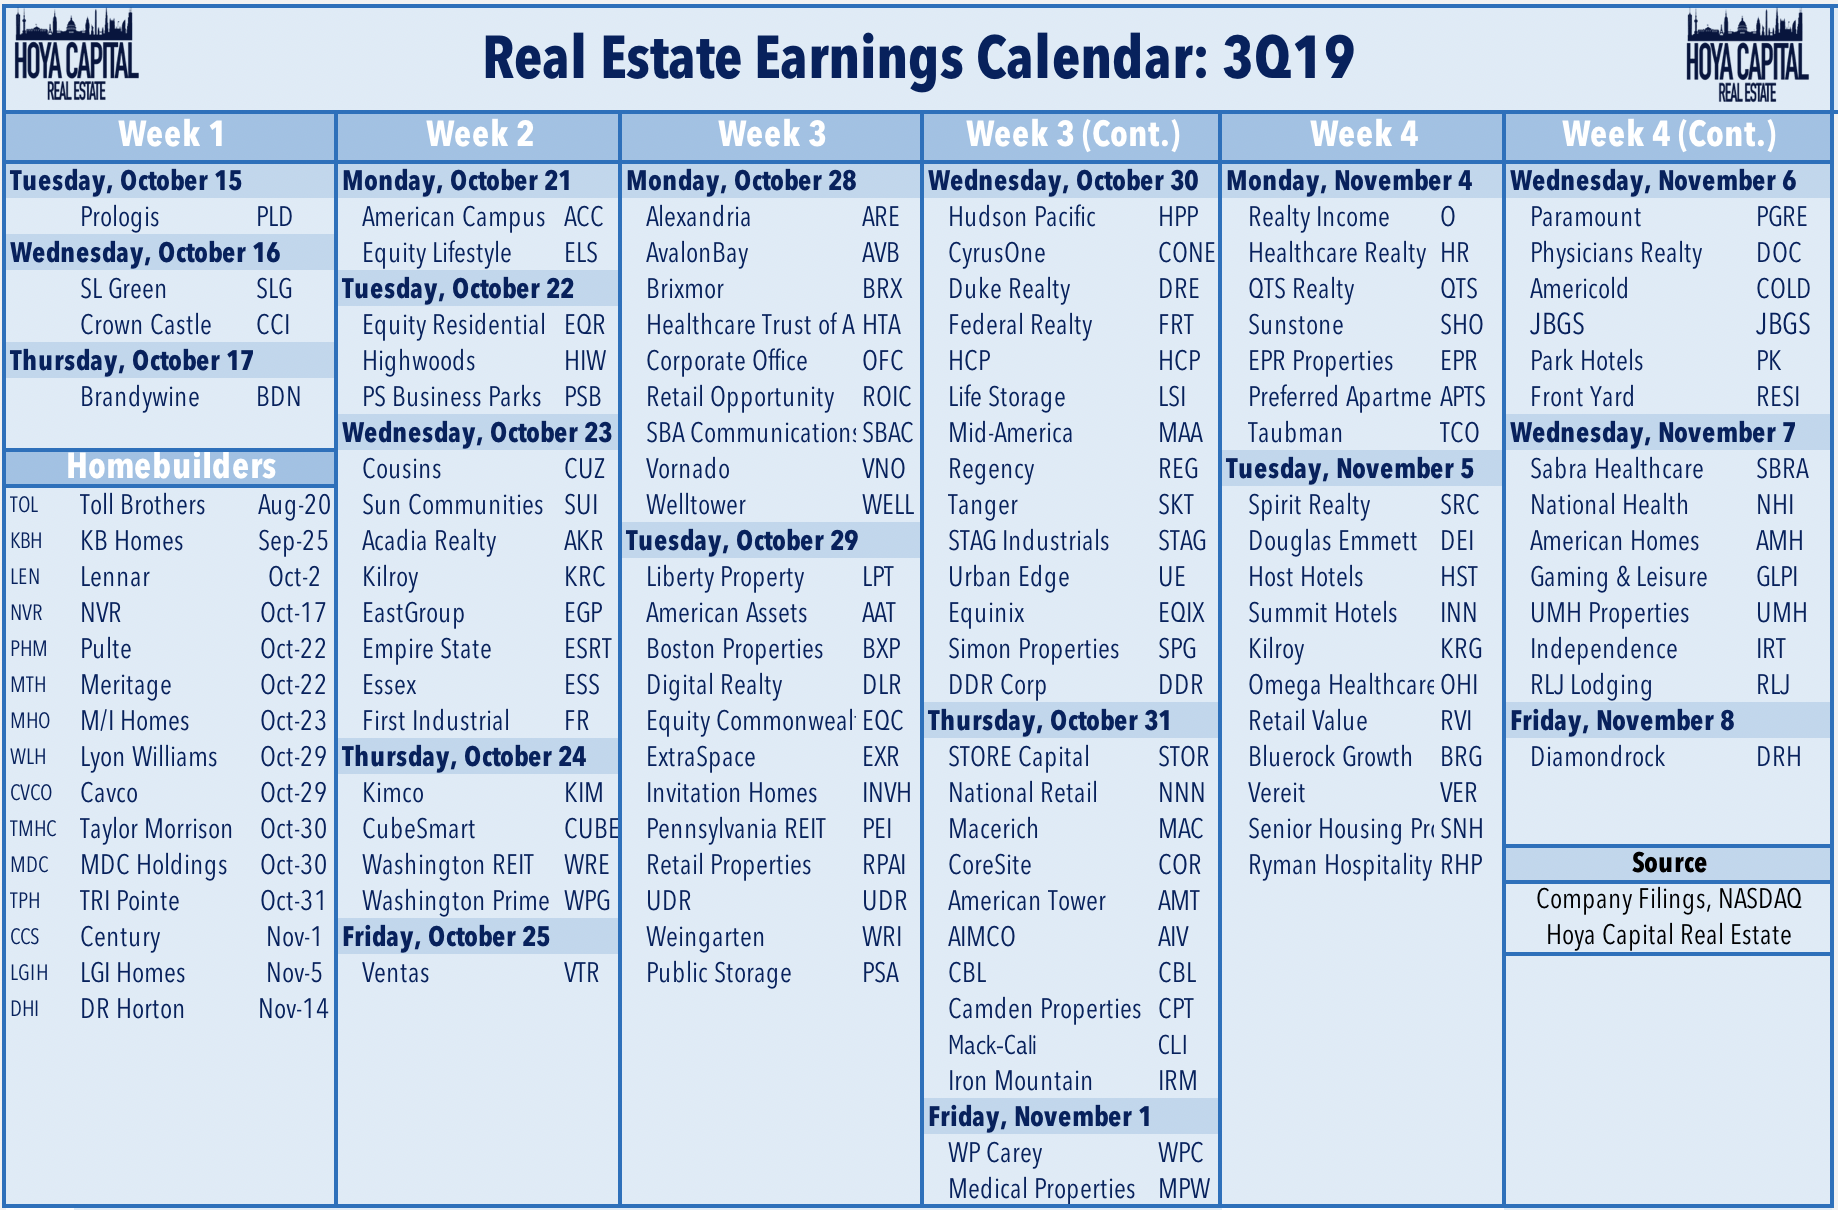 Real Estate Earnings: What To Watch For This Quarter | Seeking Alpha